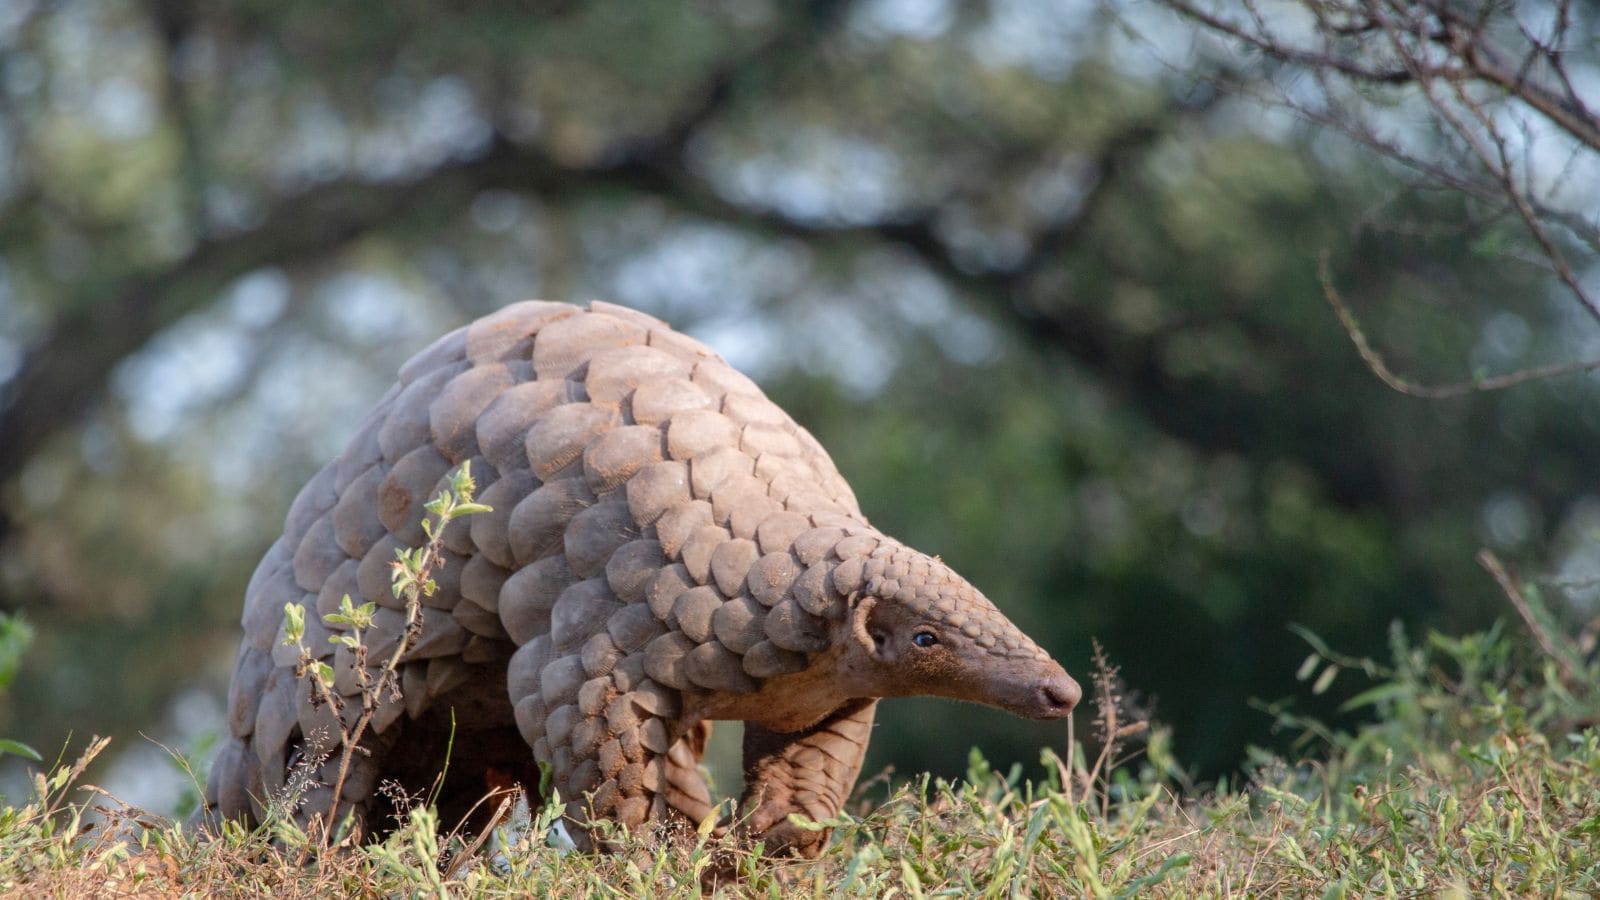 <p><span>The Chinese pangolin is a solitary, nocturnal mammal native to the northern parts of southeast Asia, southern China, and the northern Indian subcontinent. Challenges facing the Chinese pangolin include a severe trafficking threat posed by illegal wildlife trade. This is because poachers view this species’ scales as an attractive ingredient in traditional medicine. This has triggered some efforts being made to protect the Chinese pangolin via legal protections and awareness campaigns.</span></p>